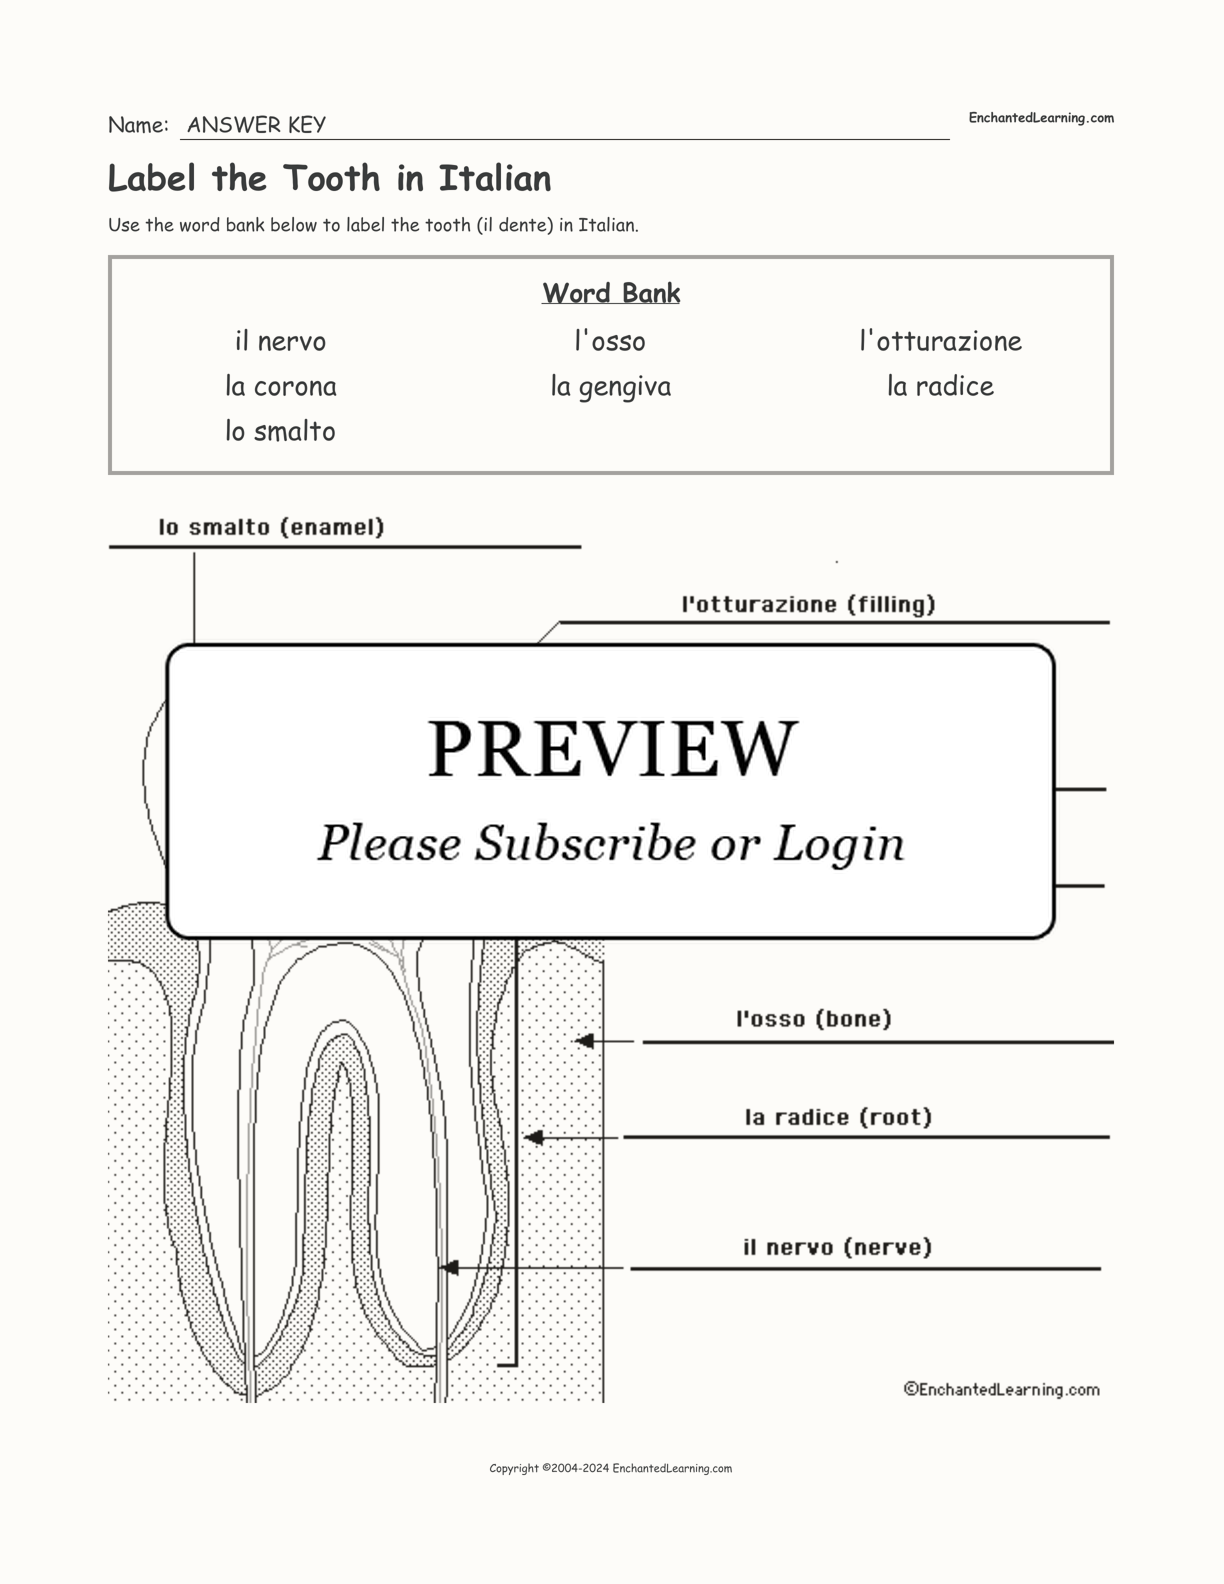 Label the Tooth in Italian interactive worksheet page 2